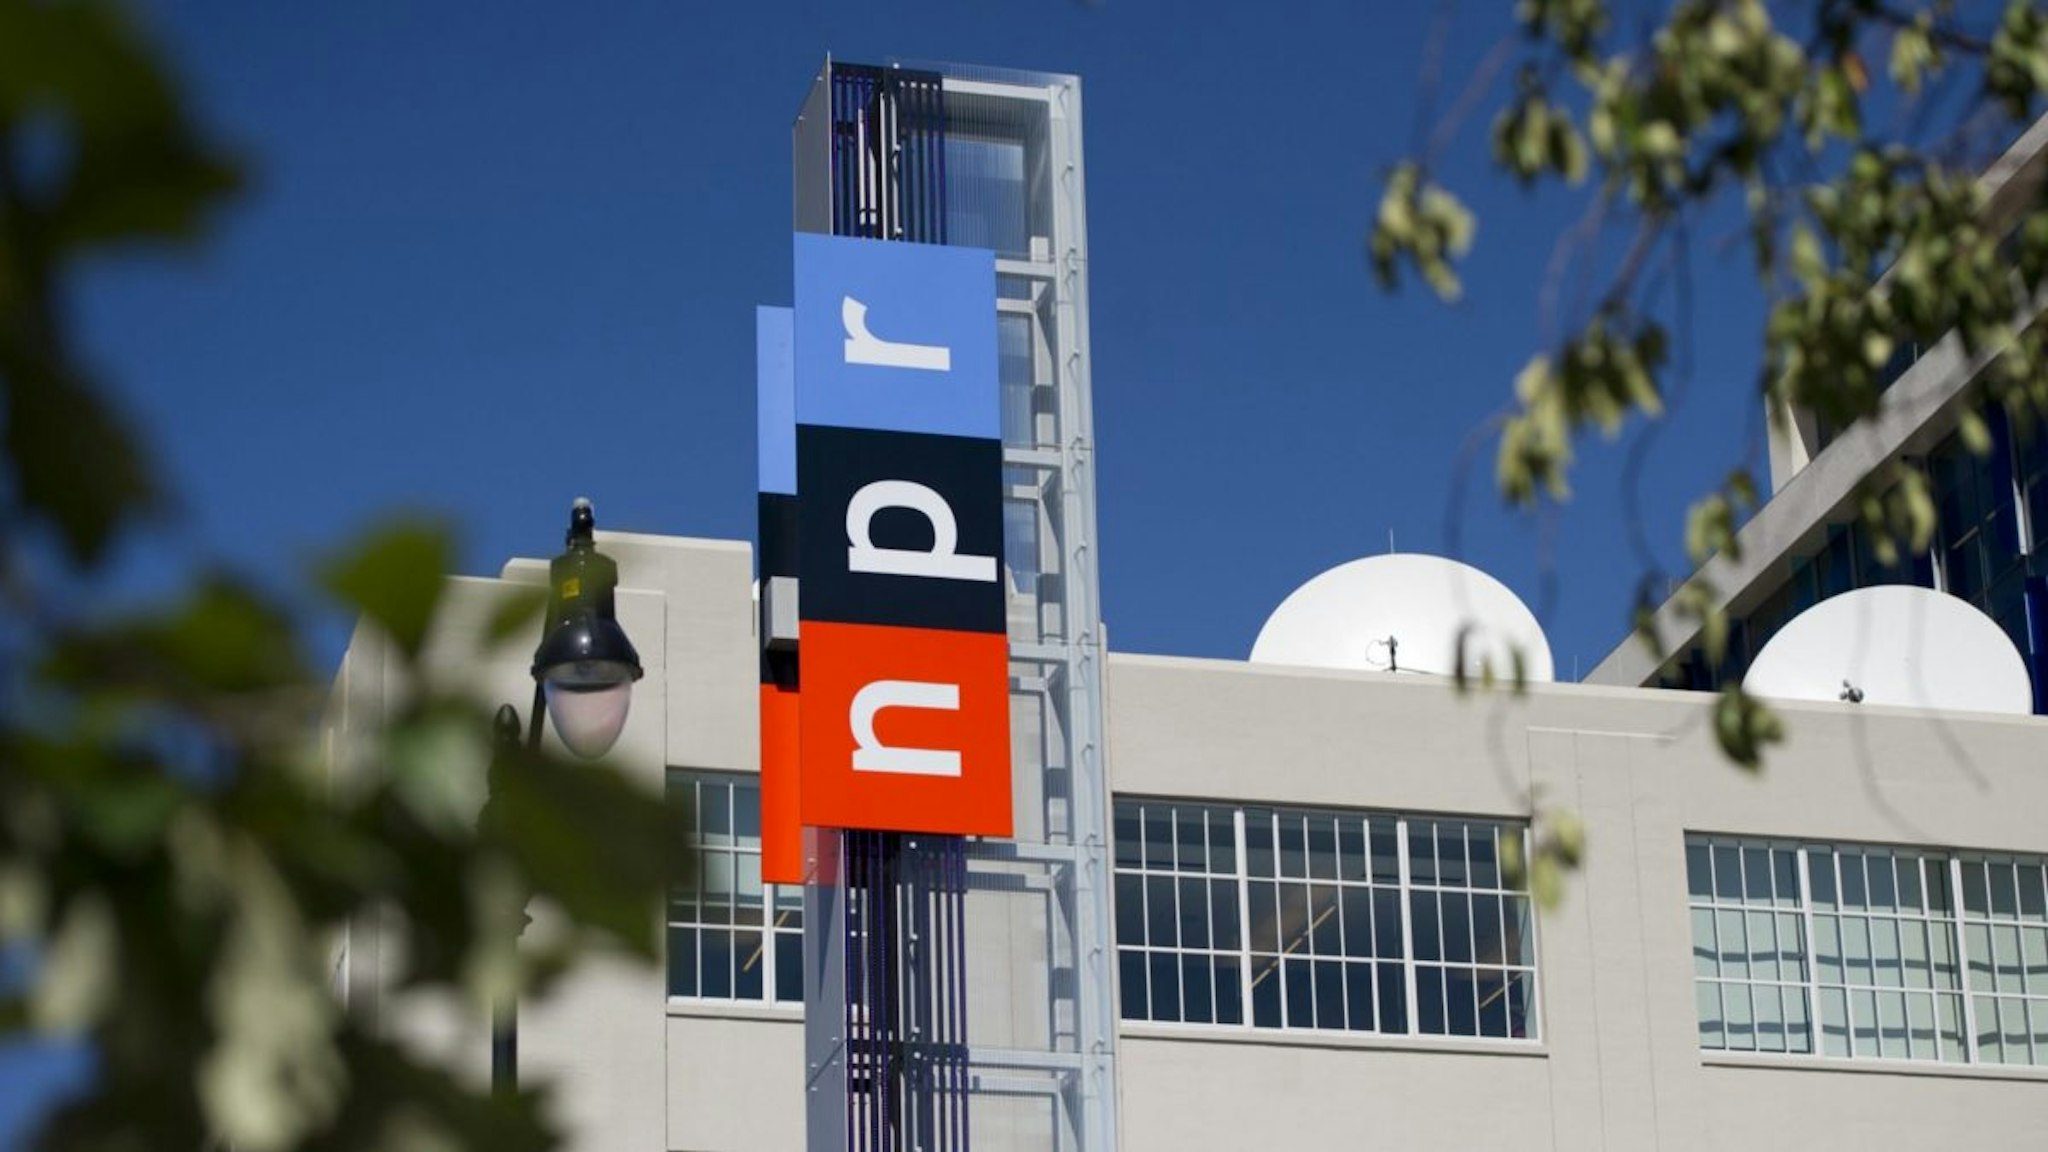 The headquarters for National Public Radio, or NPR, are seen in Washington, DC, September 17, 2013.